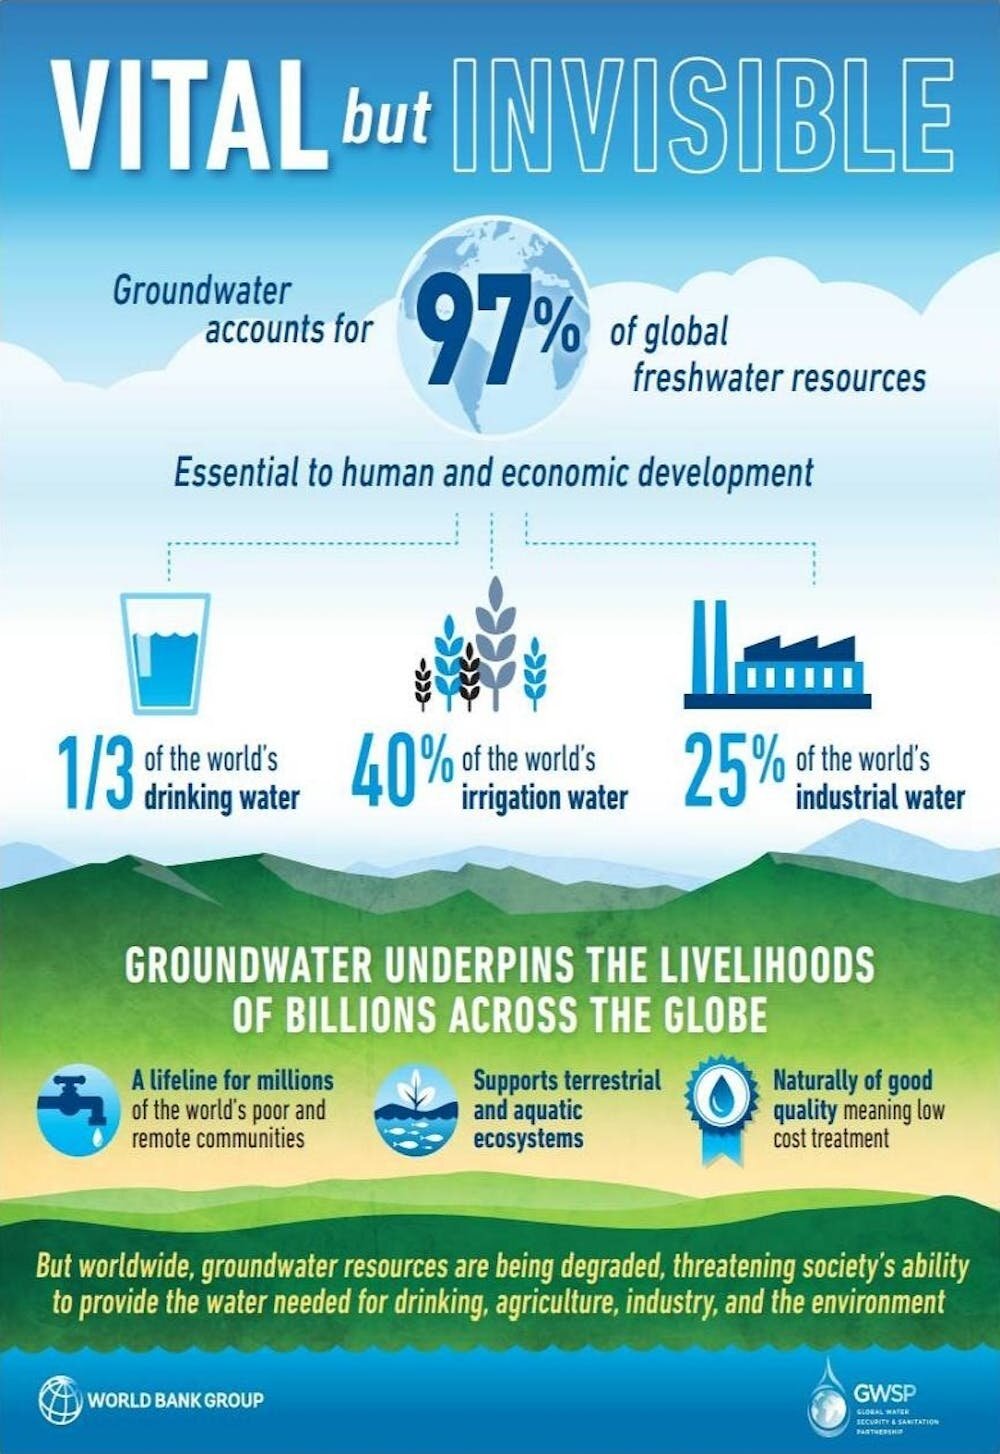 #Humans are depleting groundwater worldwide, but there are ways to replenish it